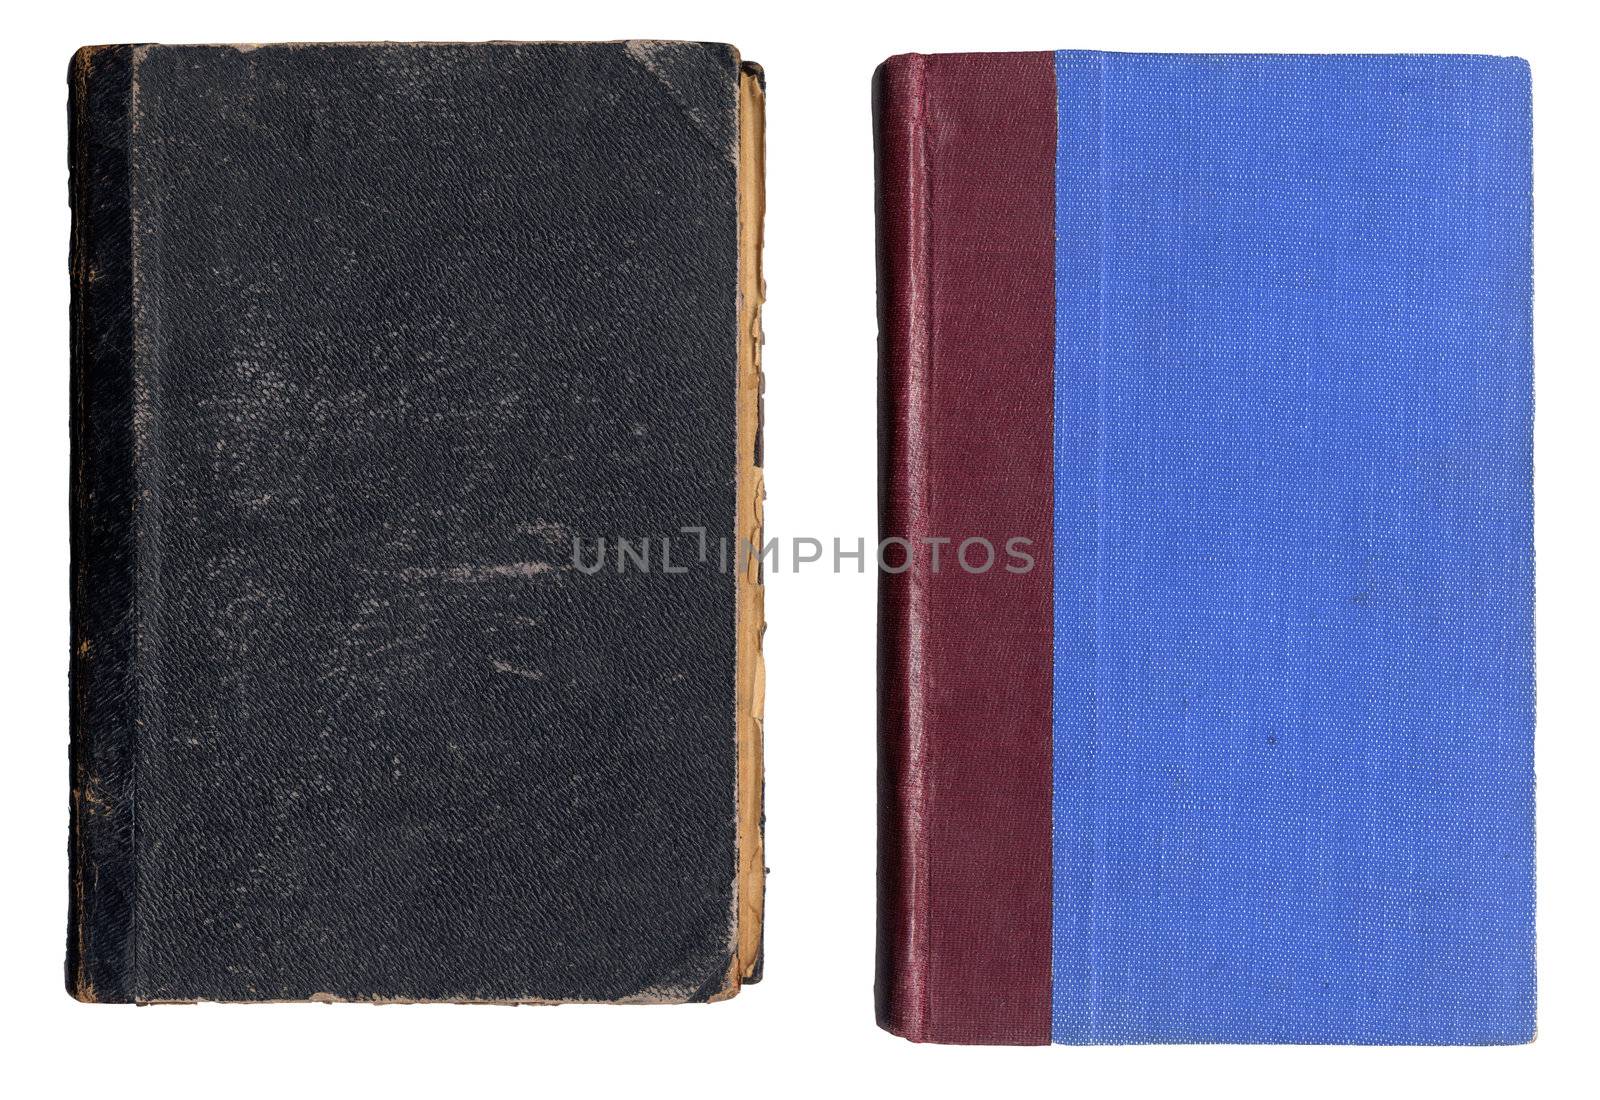 Two Old Book Covers by omiq